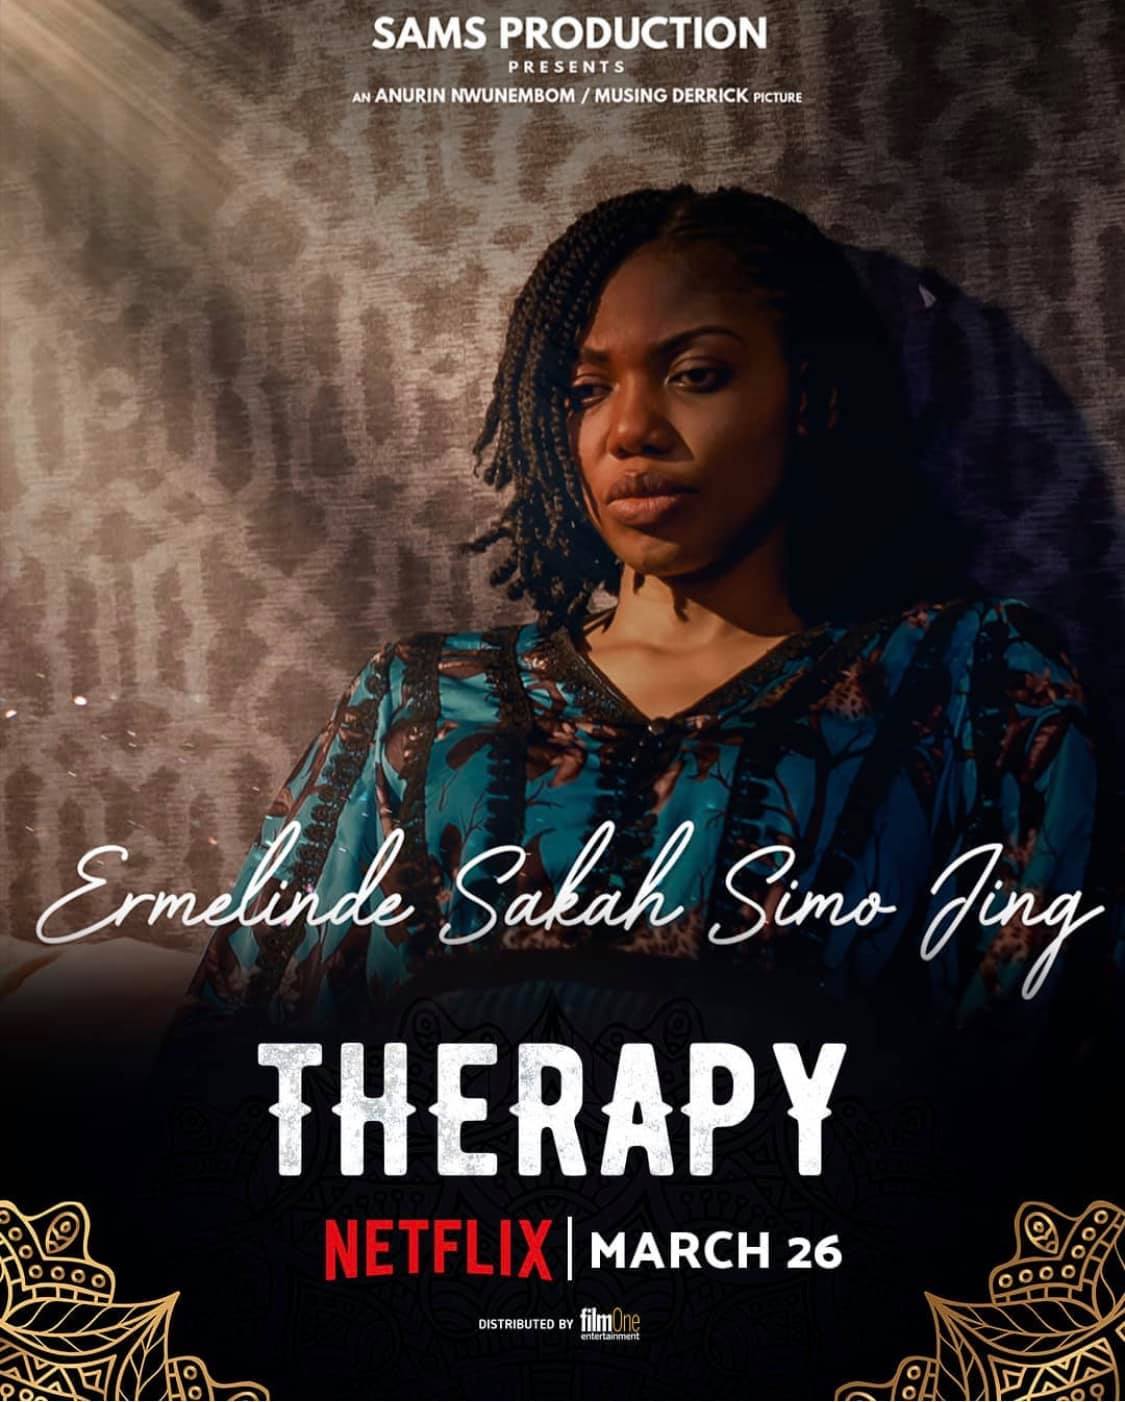 The Best Collywood films streaming on Netflix in 2021 - Therapy